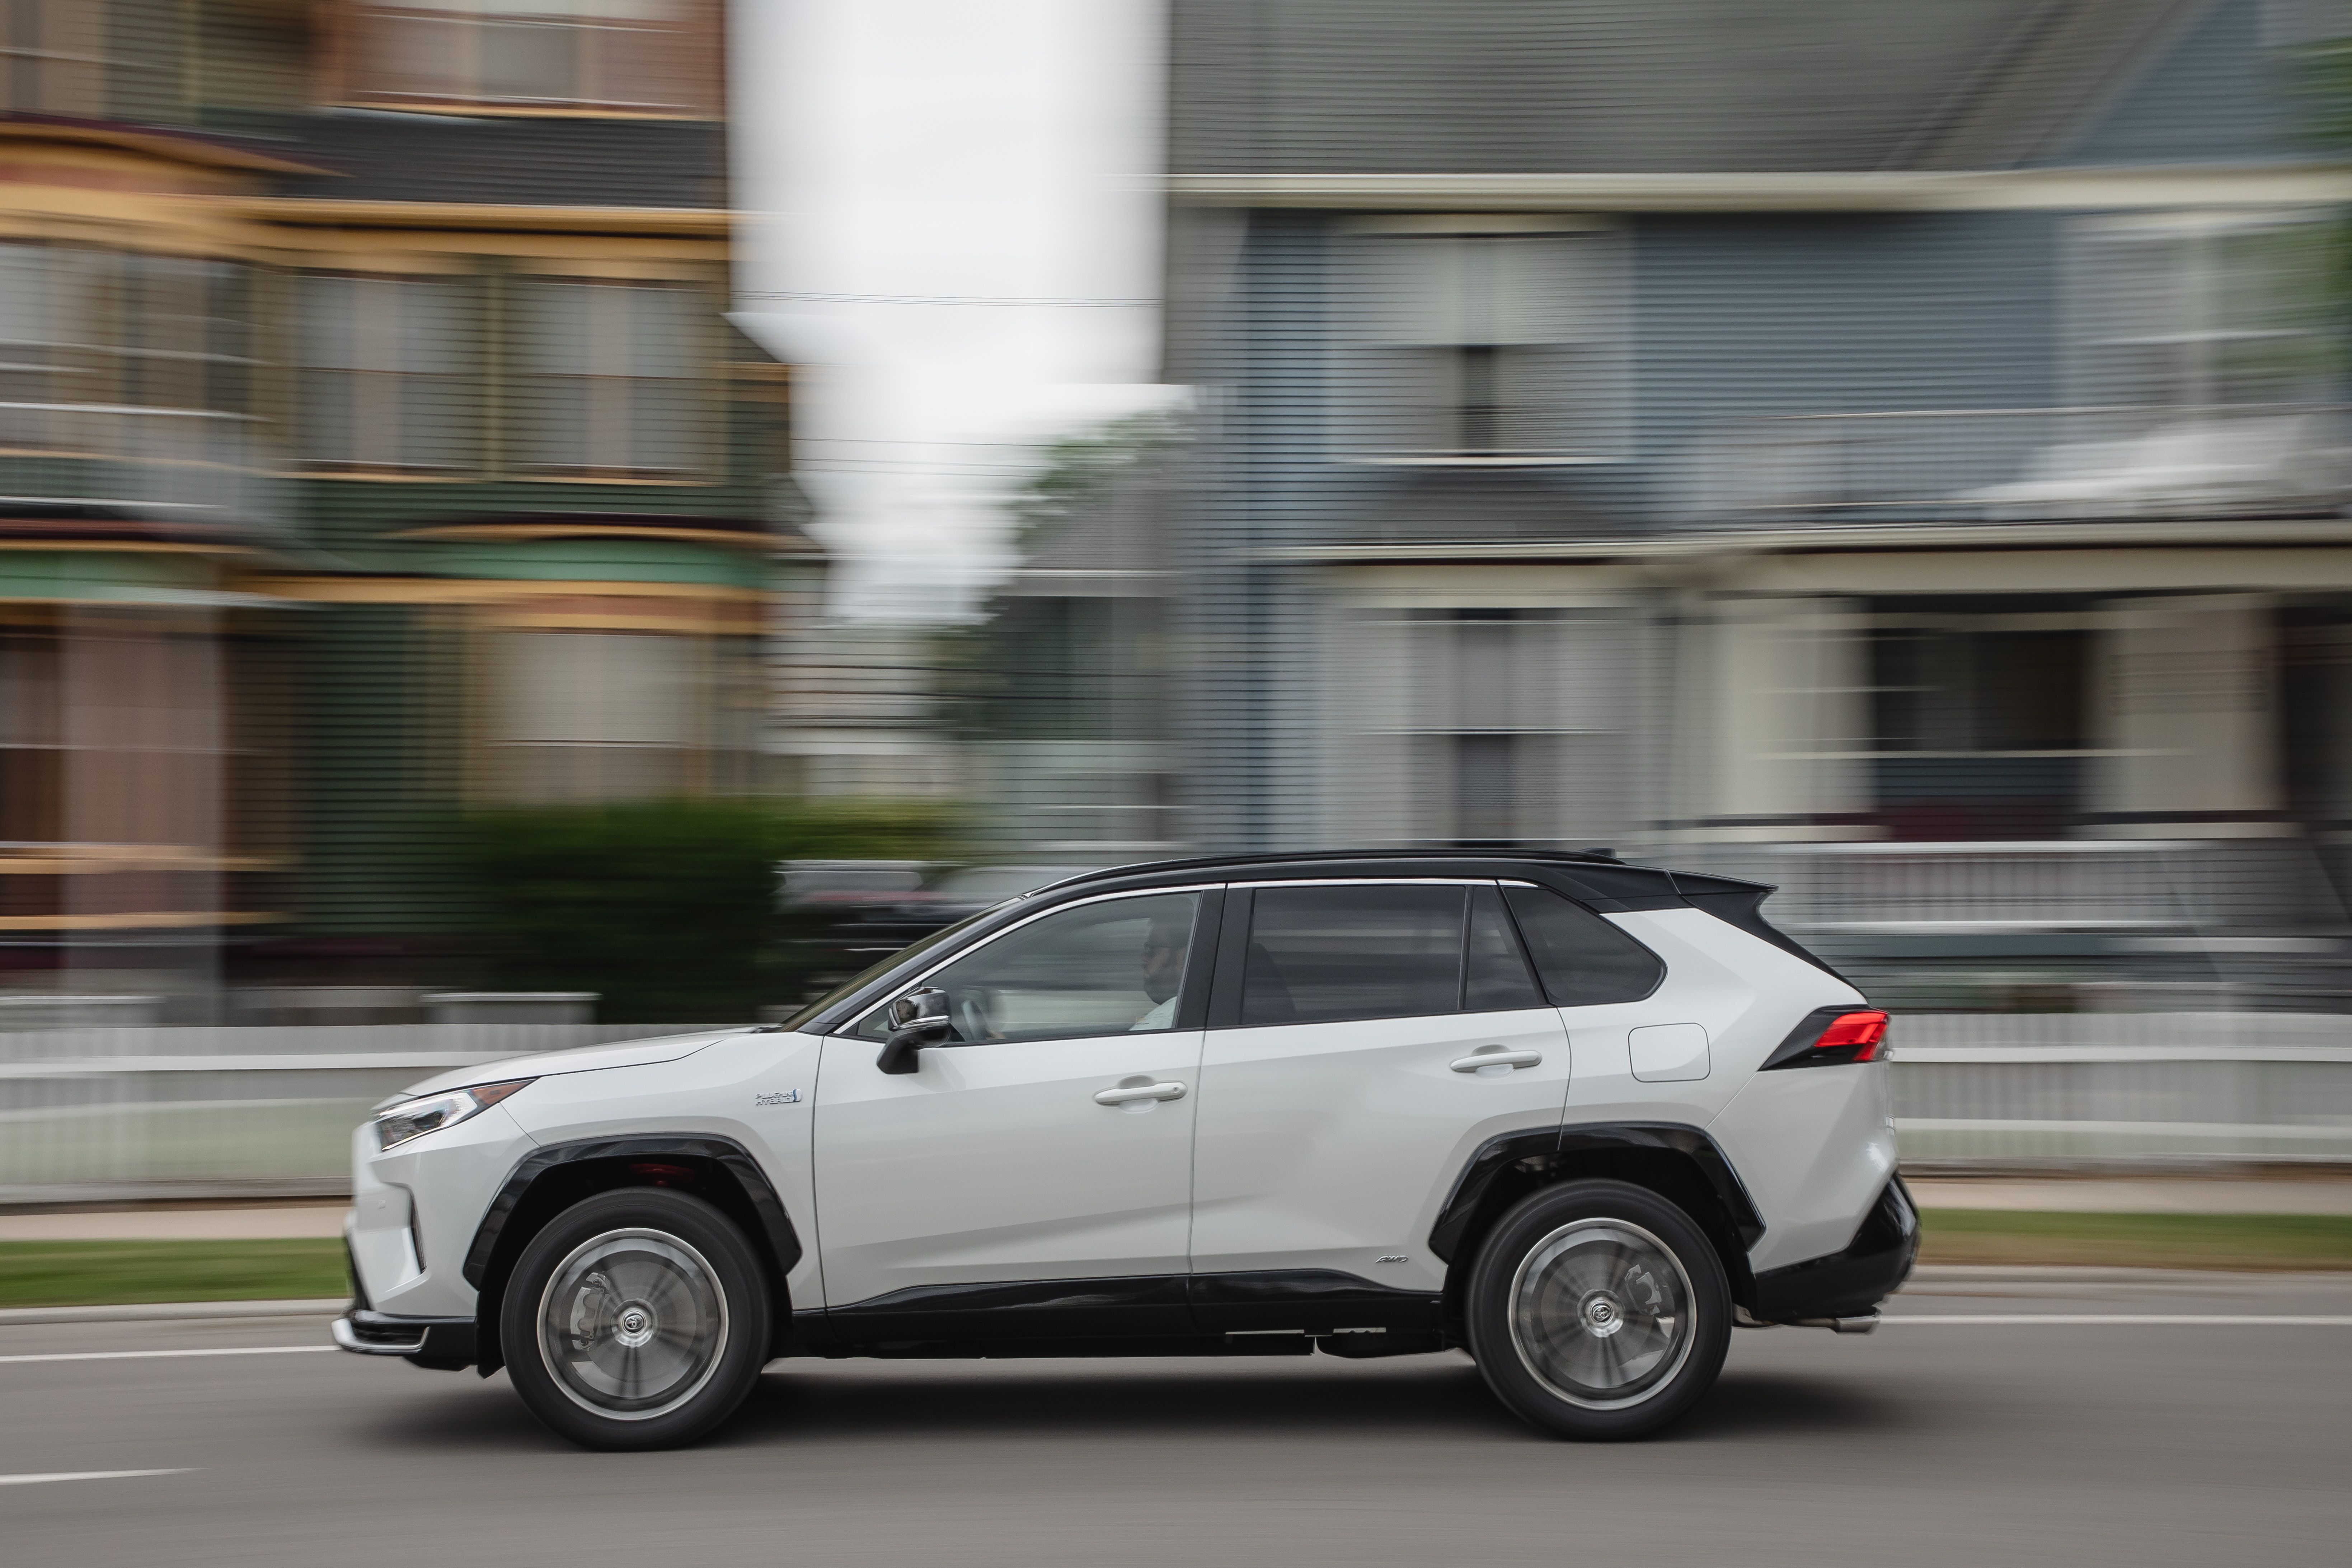 Getting a Toyota RAV4 Prime This Year Will Be Tough